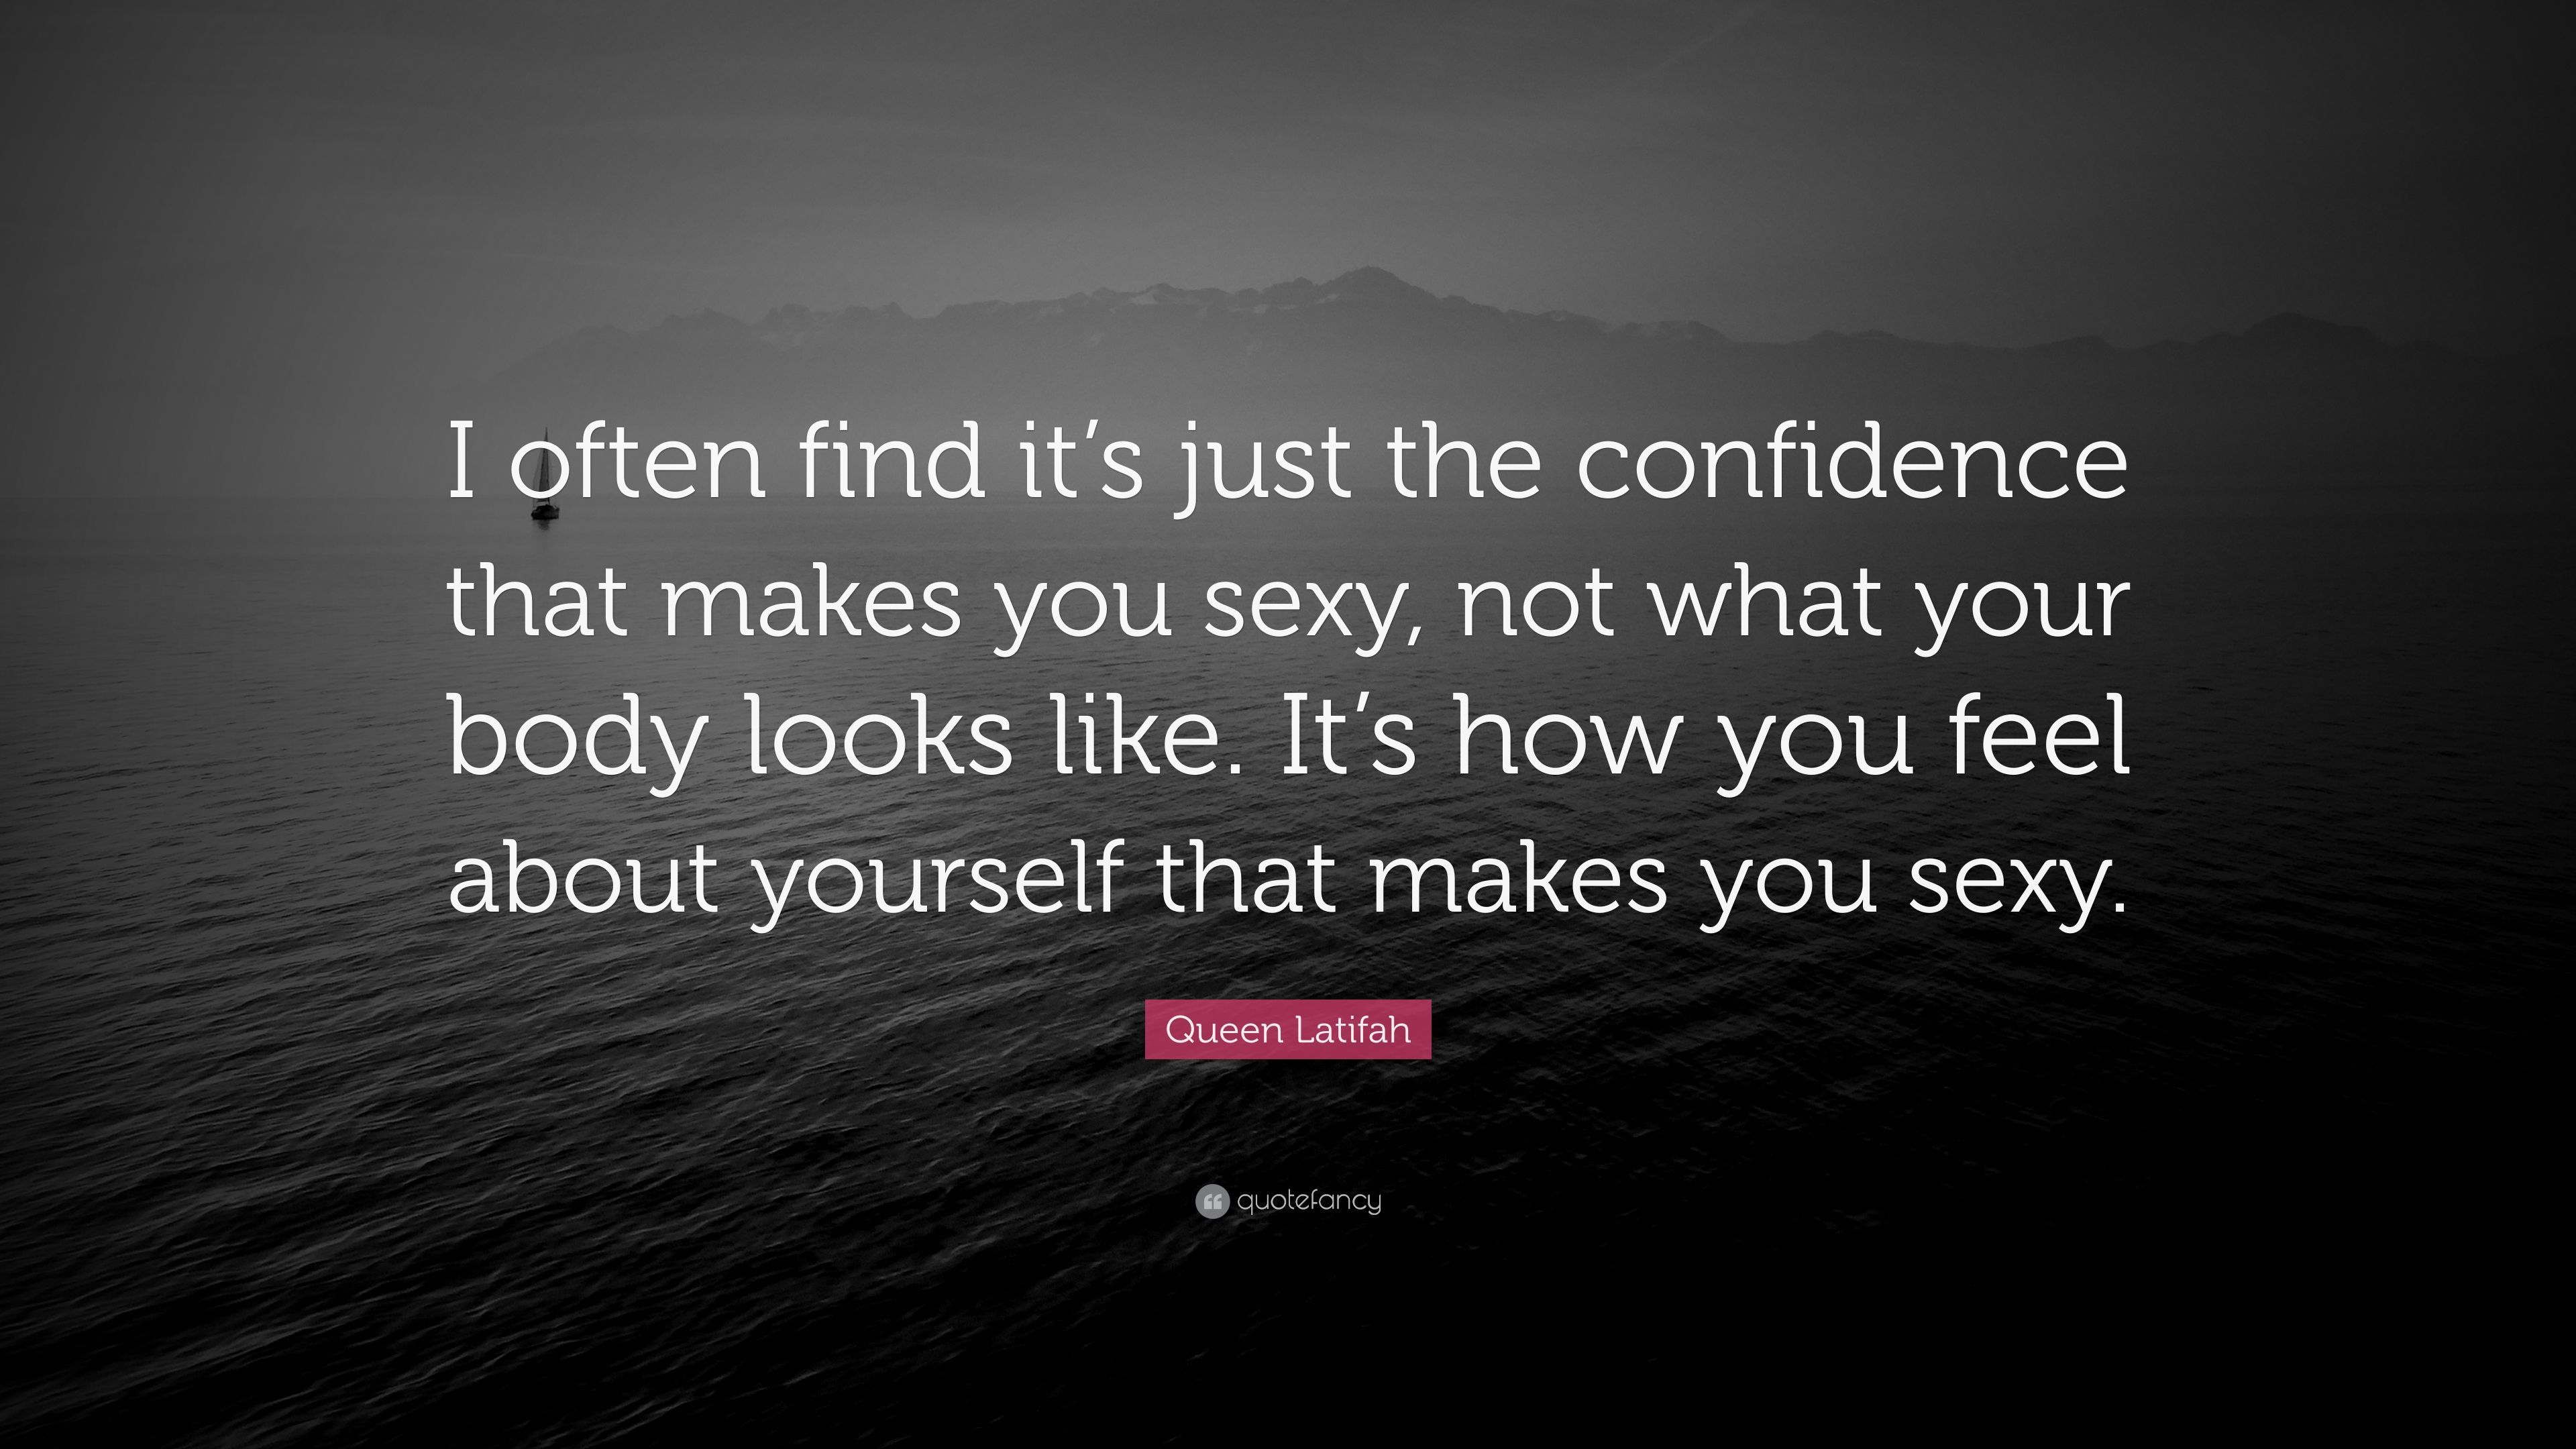 Queen Latifah Quote: “I often find it's just the confidence that makes you, not what your body looks like. It's how you feel about yourse.”